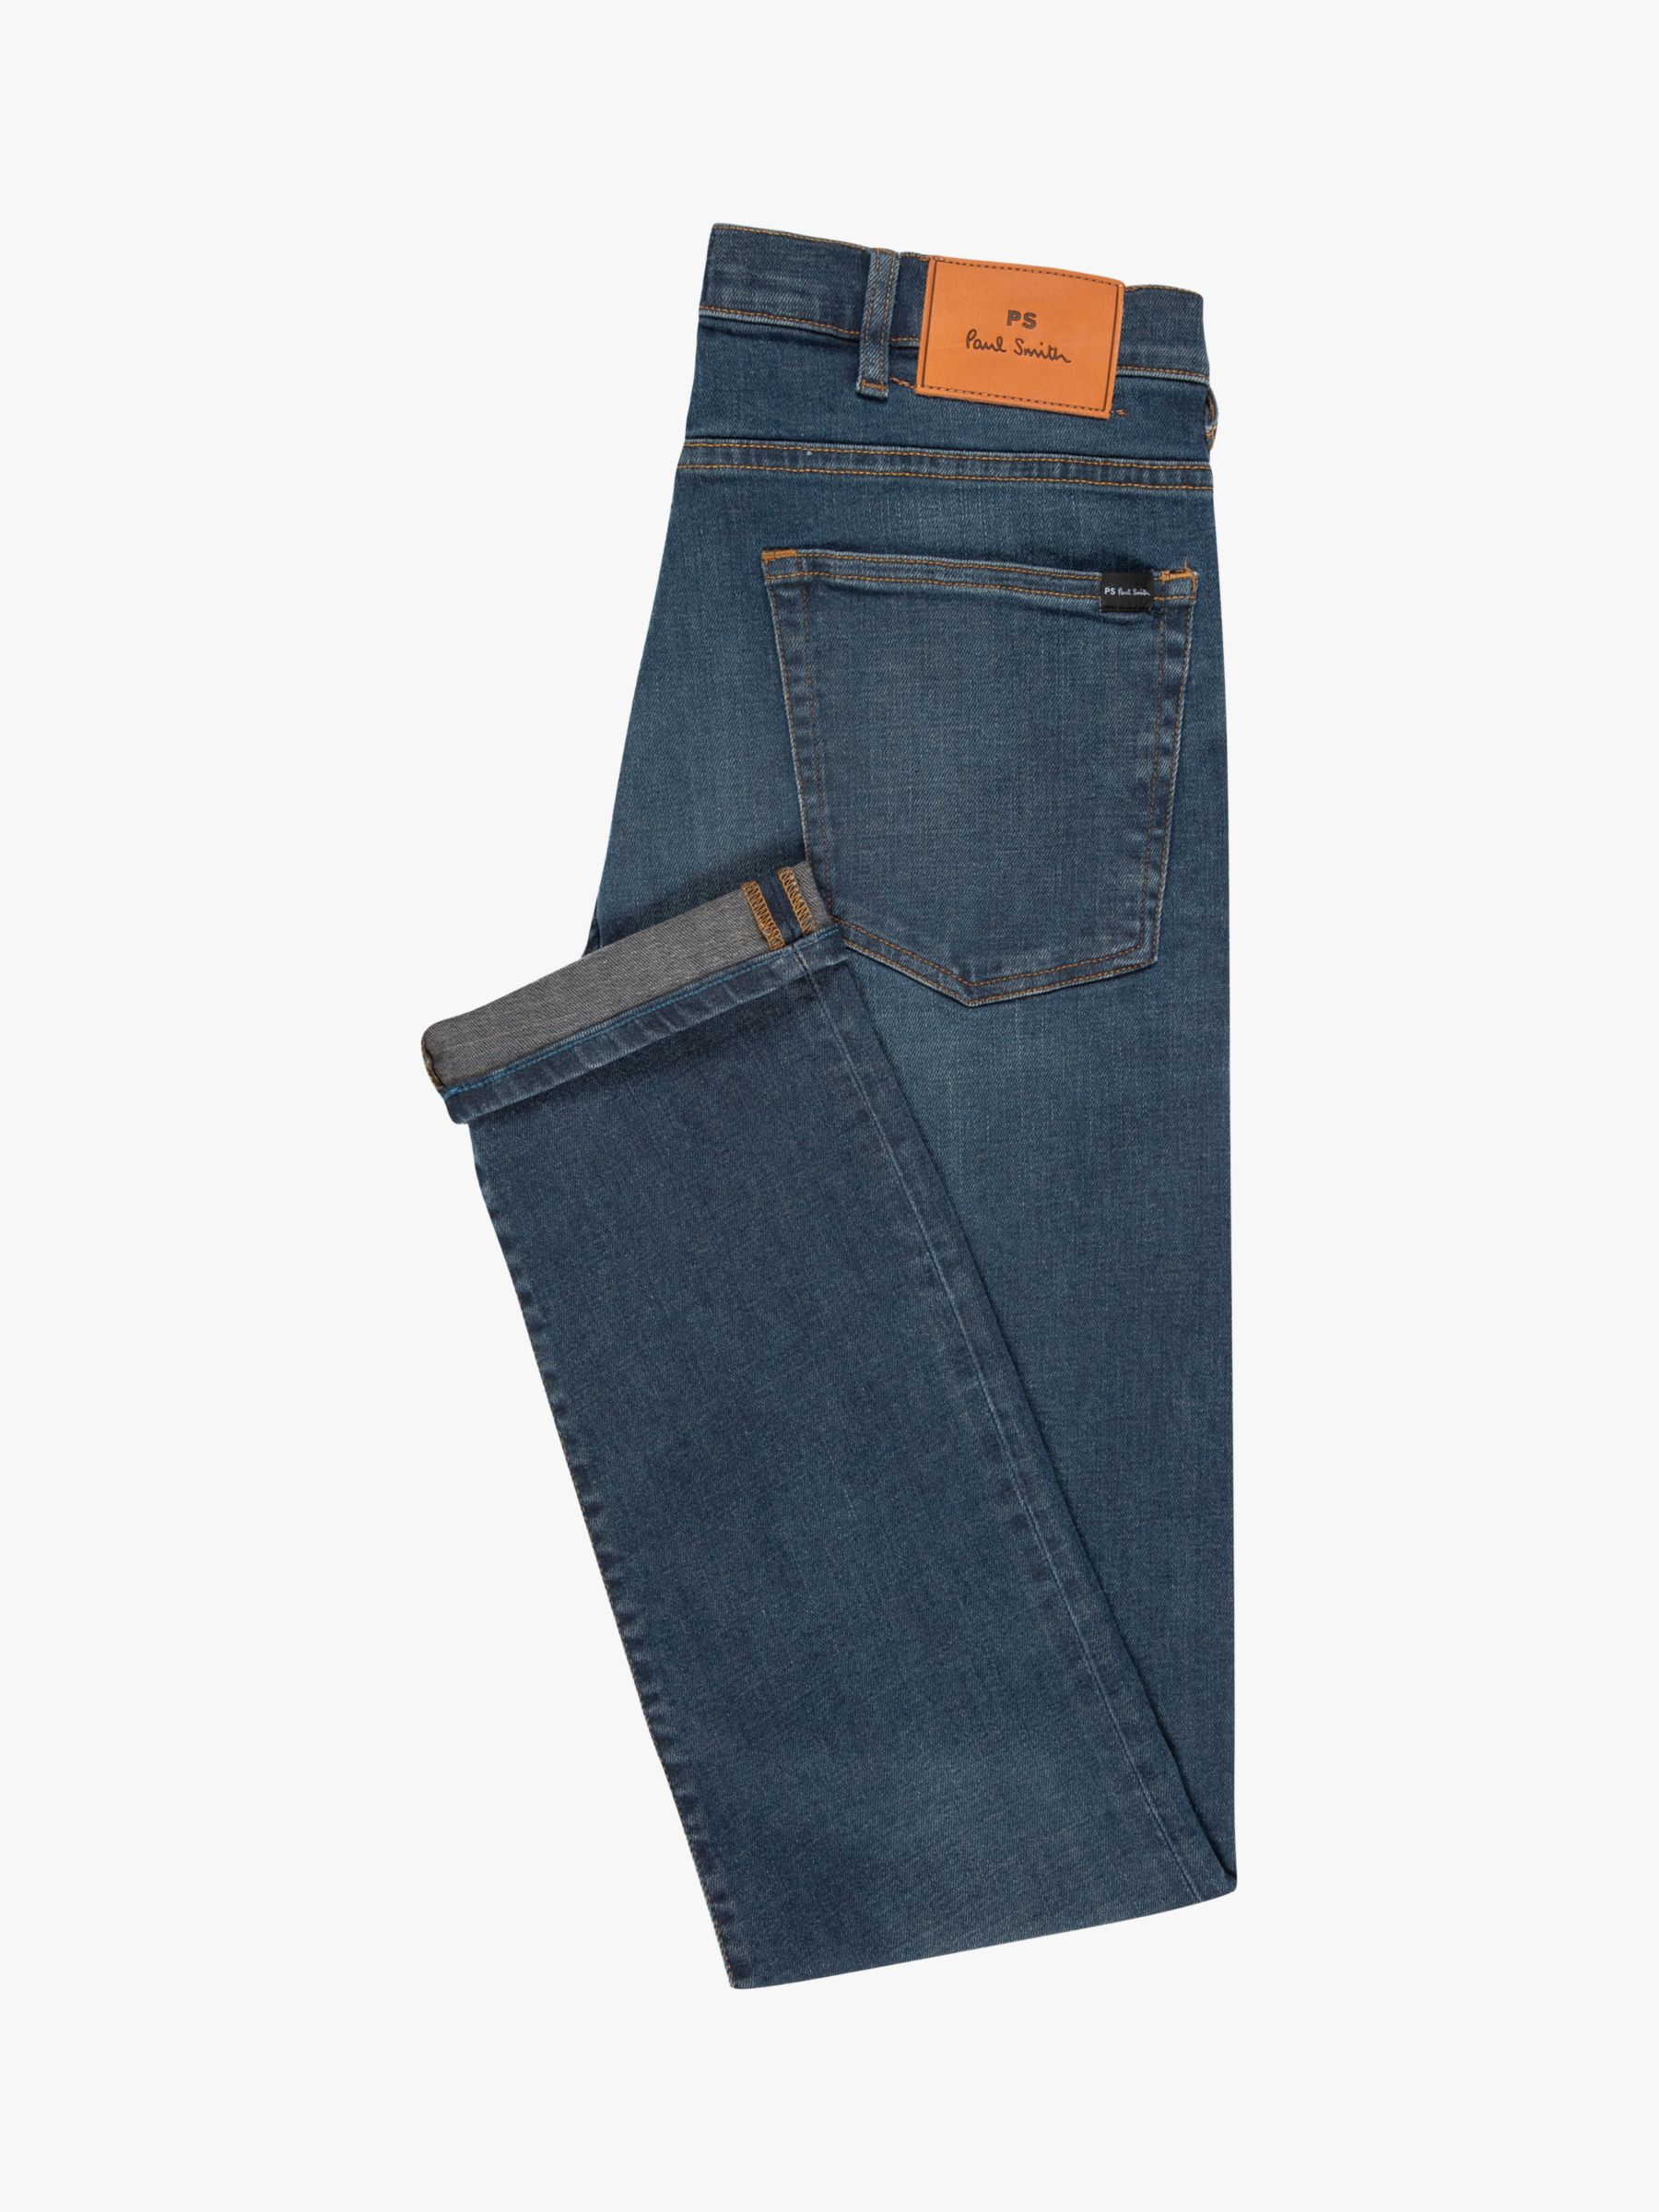 paul smith tapered stretch jeans